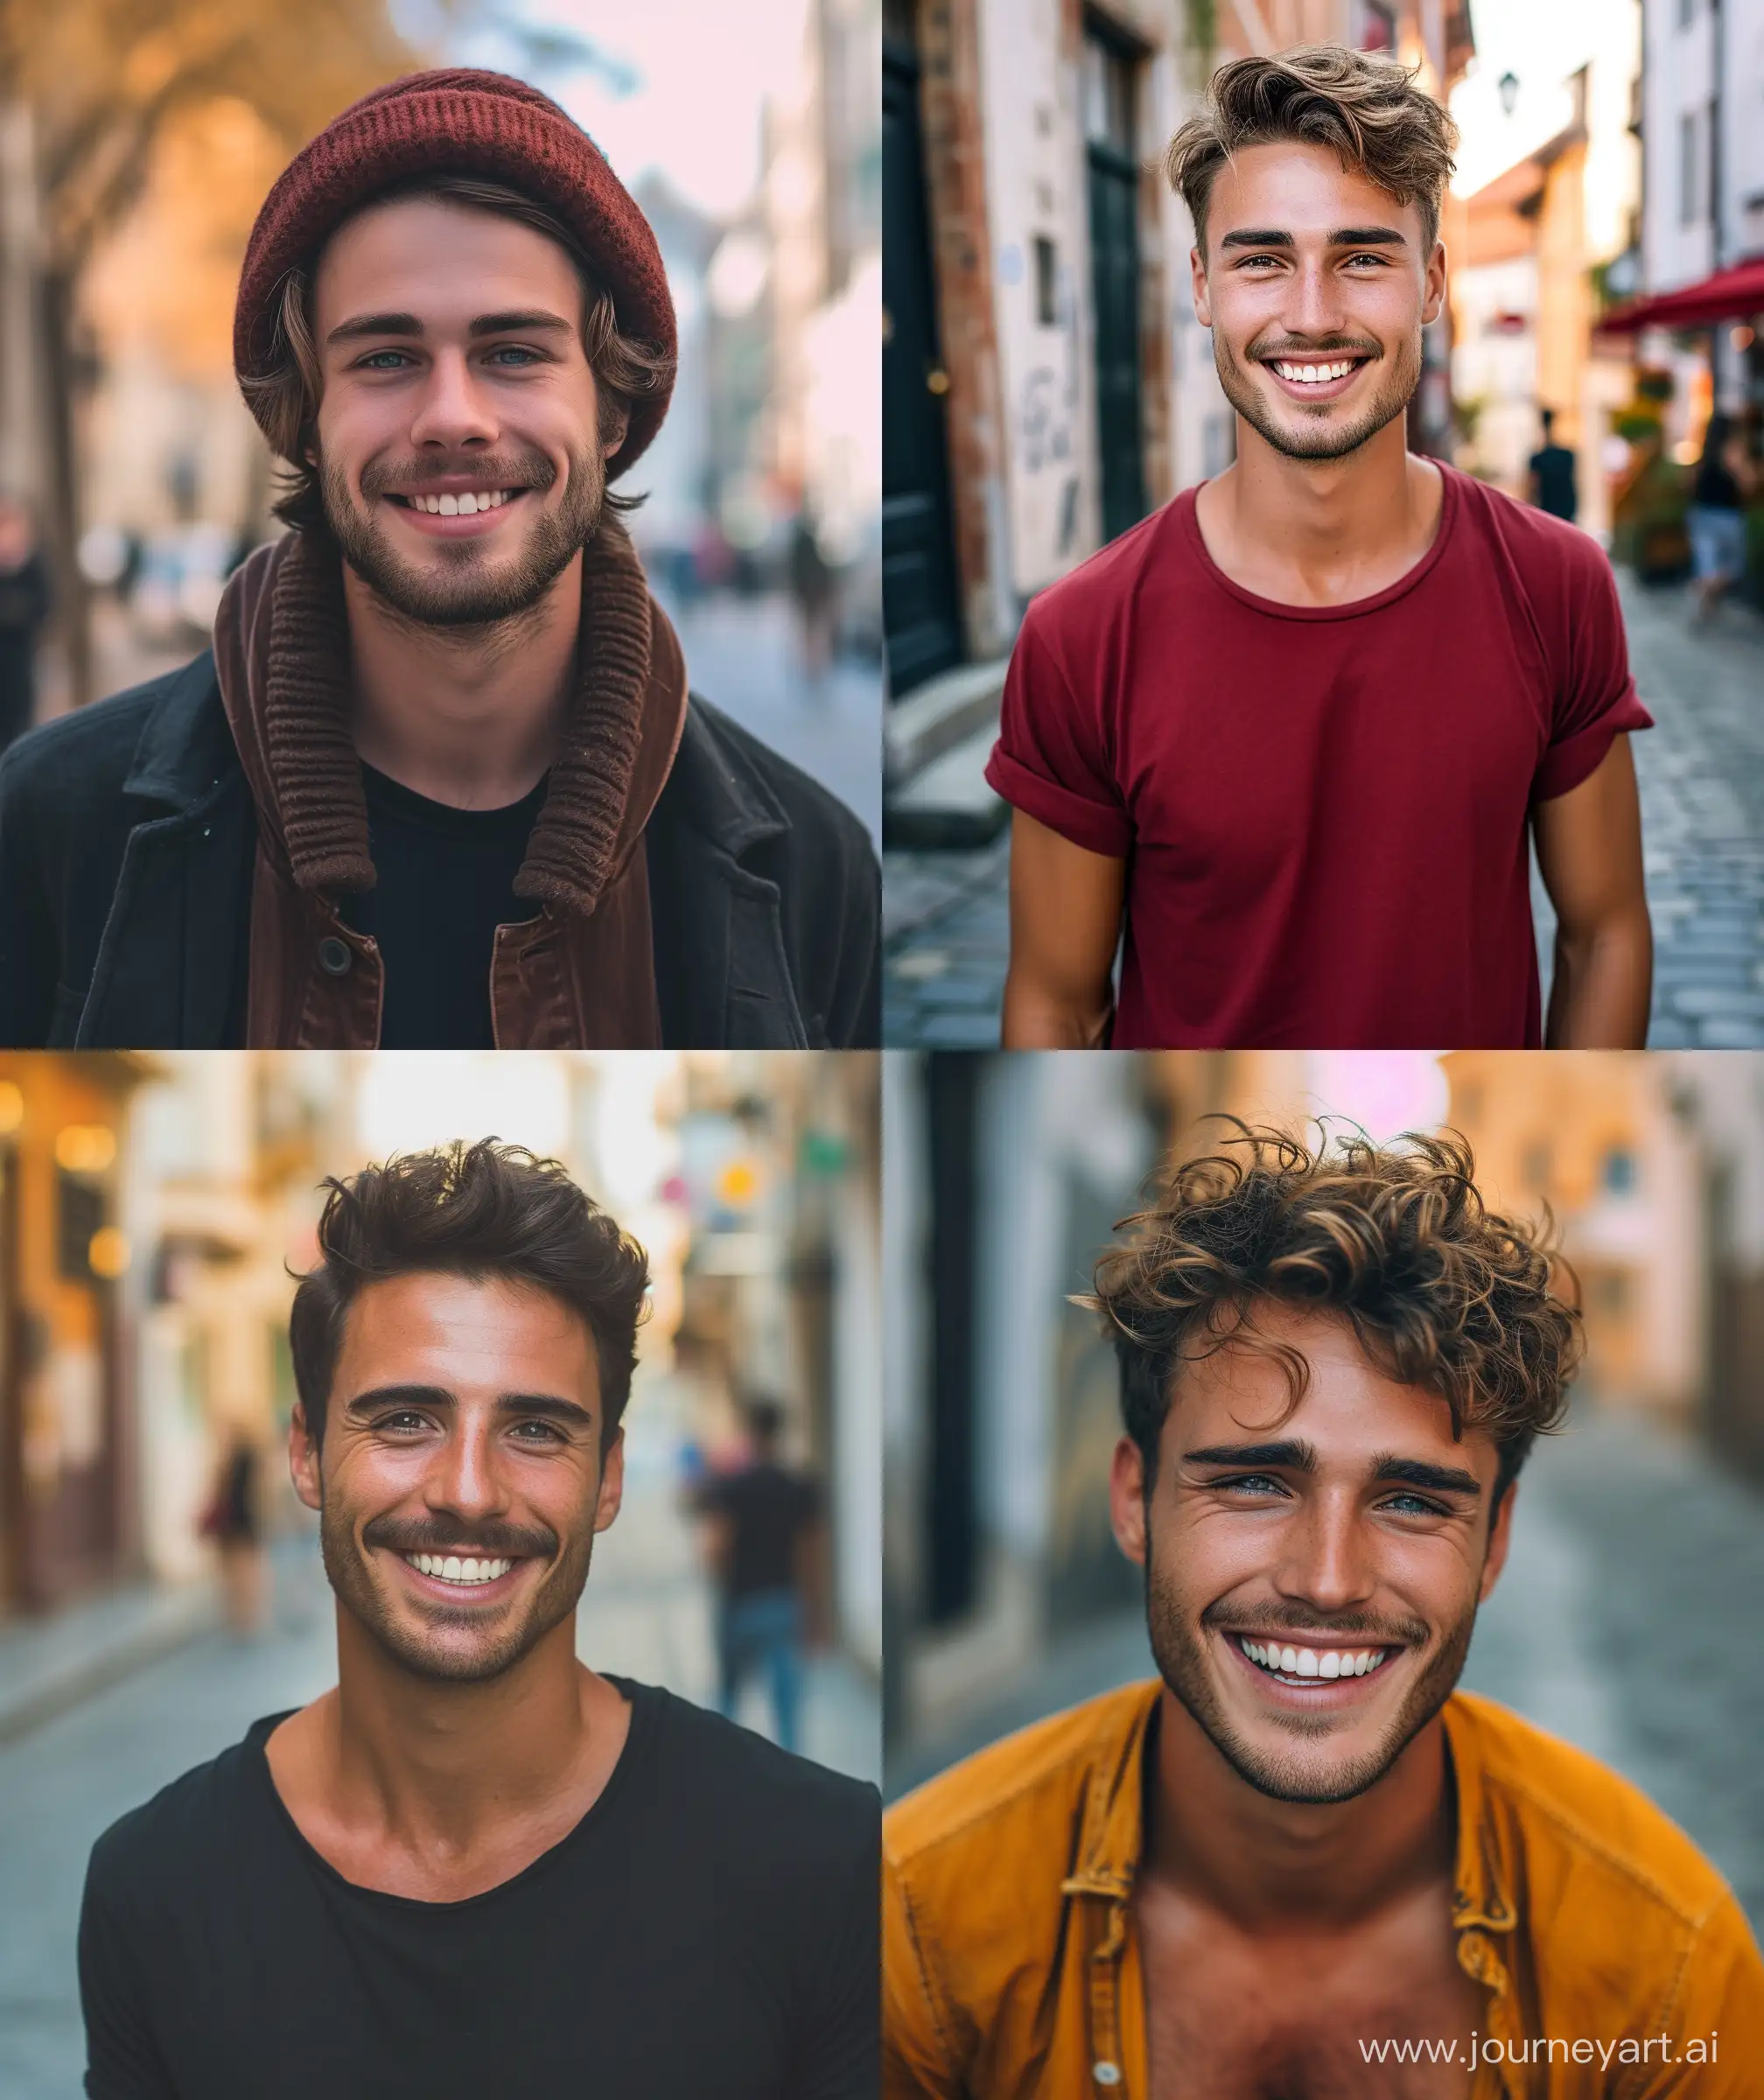 Cheerful-and-Funny-StreetStyle-Man-Inspired-by-YouTube